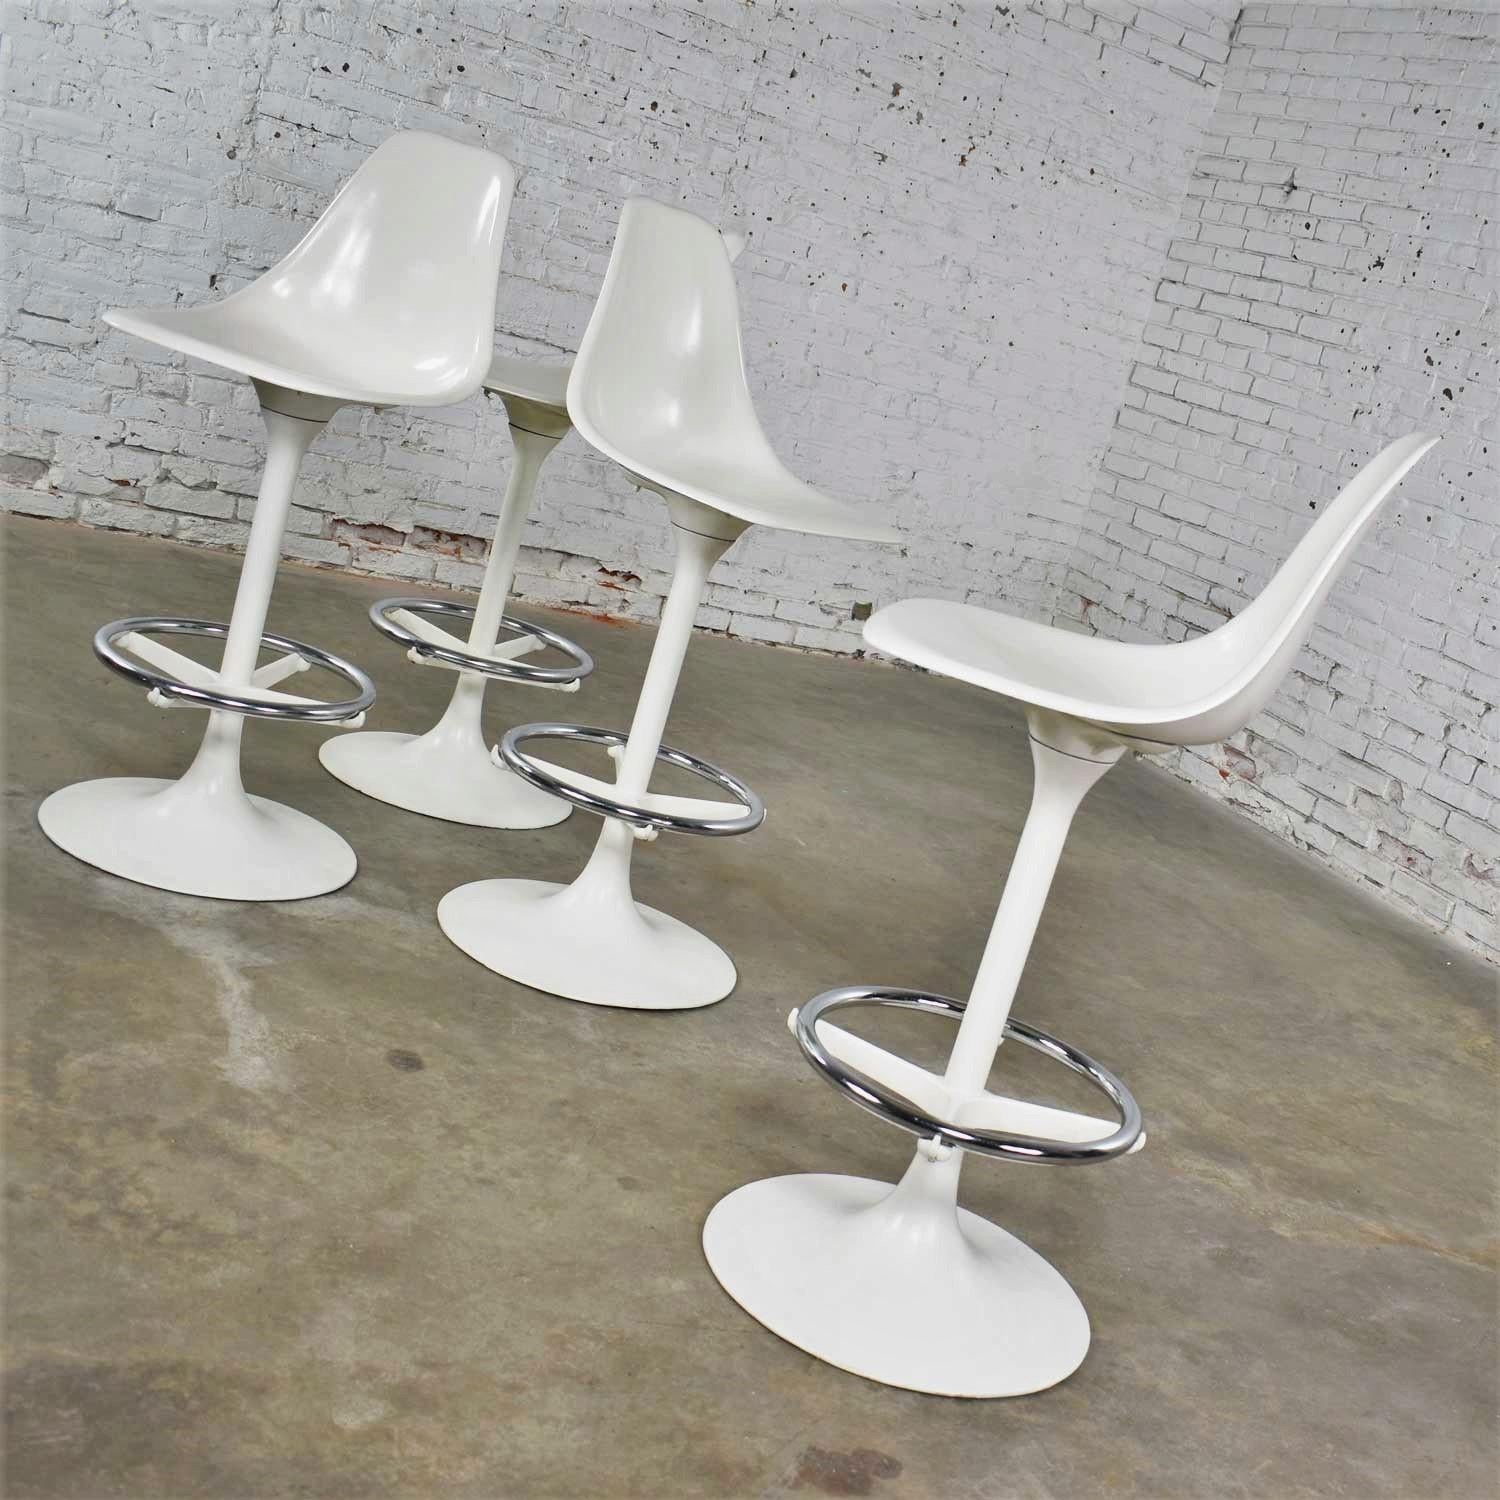 American 4 Tulip Style White Swivel Barstools by Arthur Umanoff for Contemporary Shells